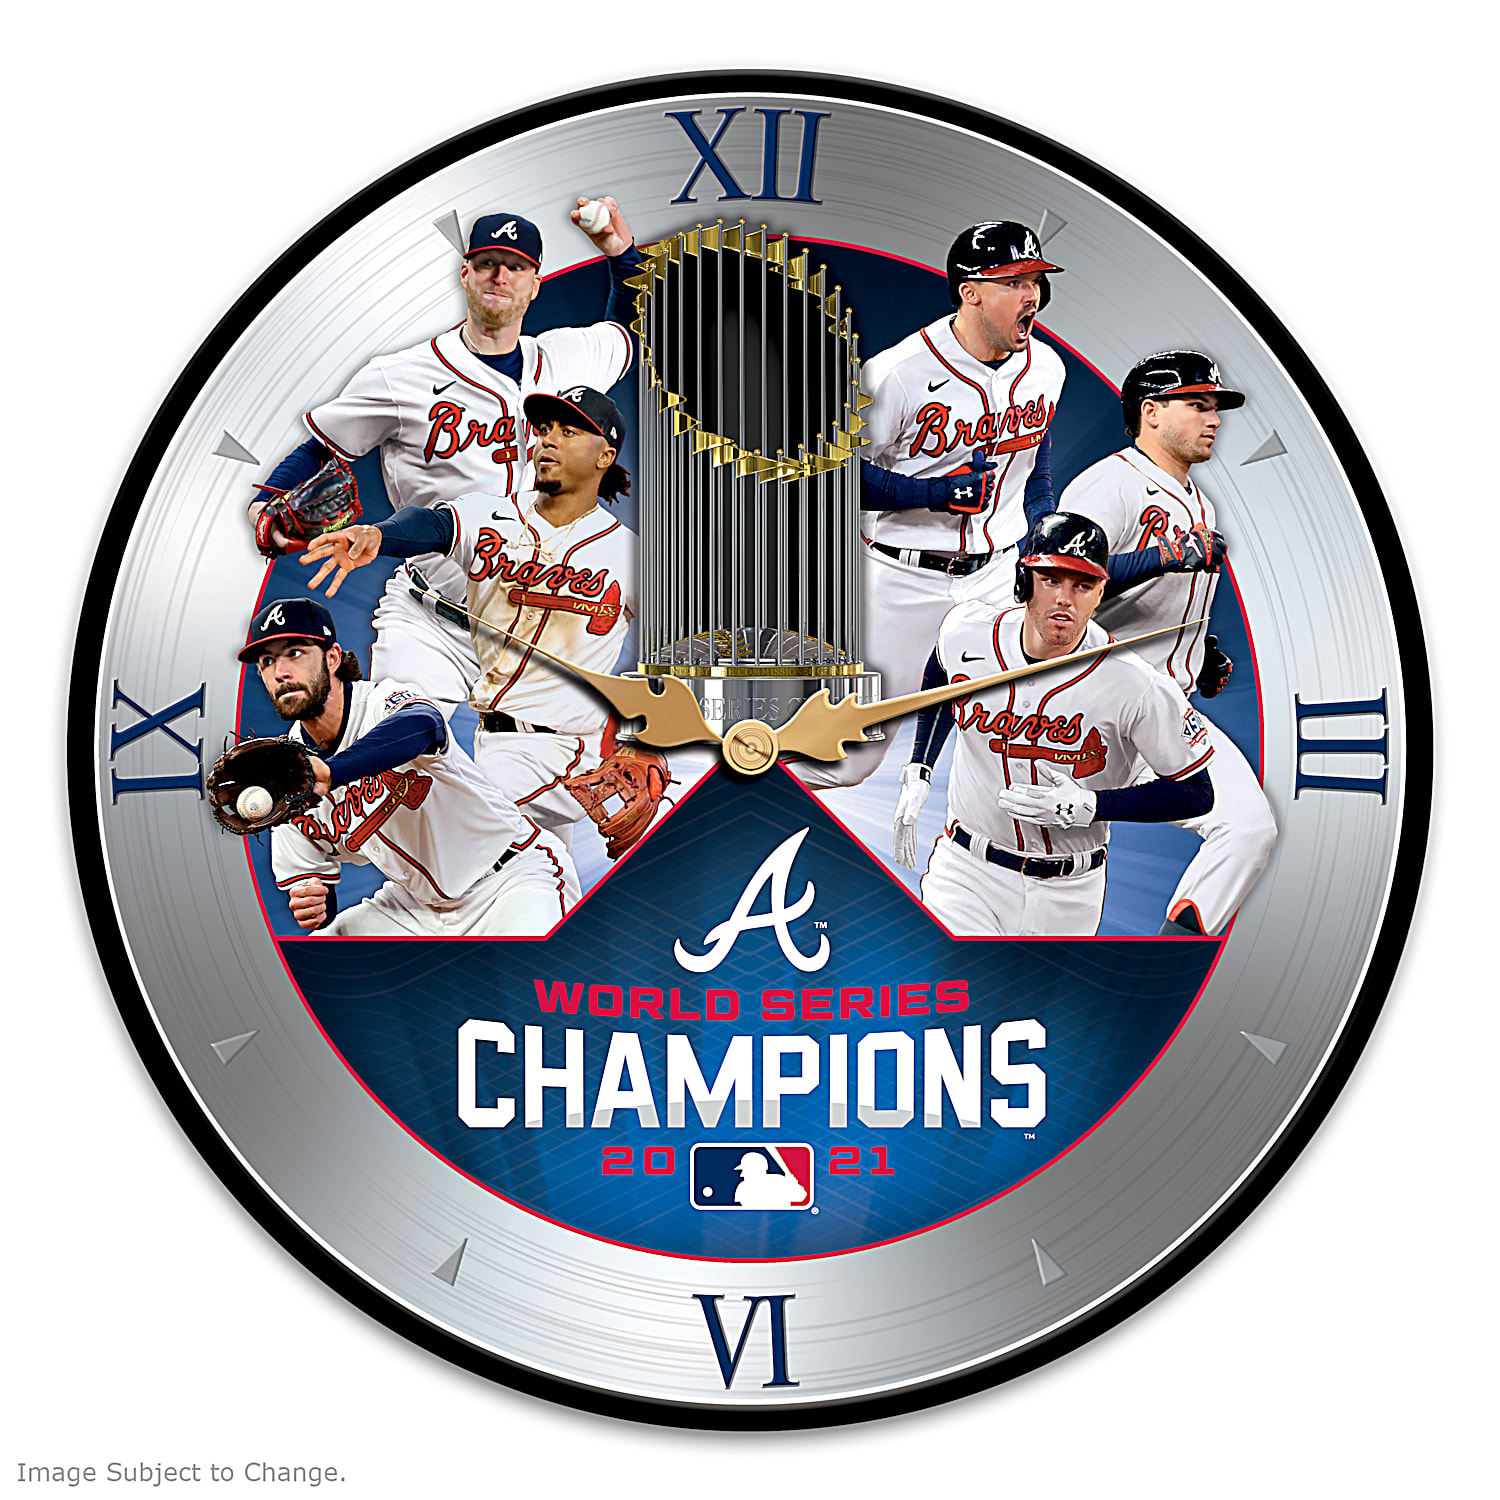 2021 MLB World Series Champions Atlanta Braves Wall Clock Featuring  Full-Color Images Of Key Players And Adorned With Team Colors And Logos